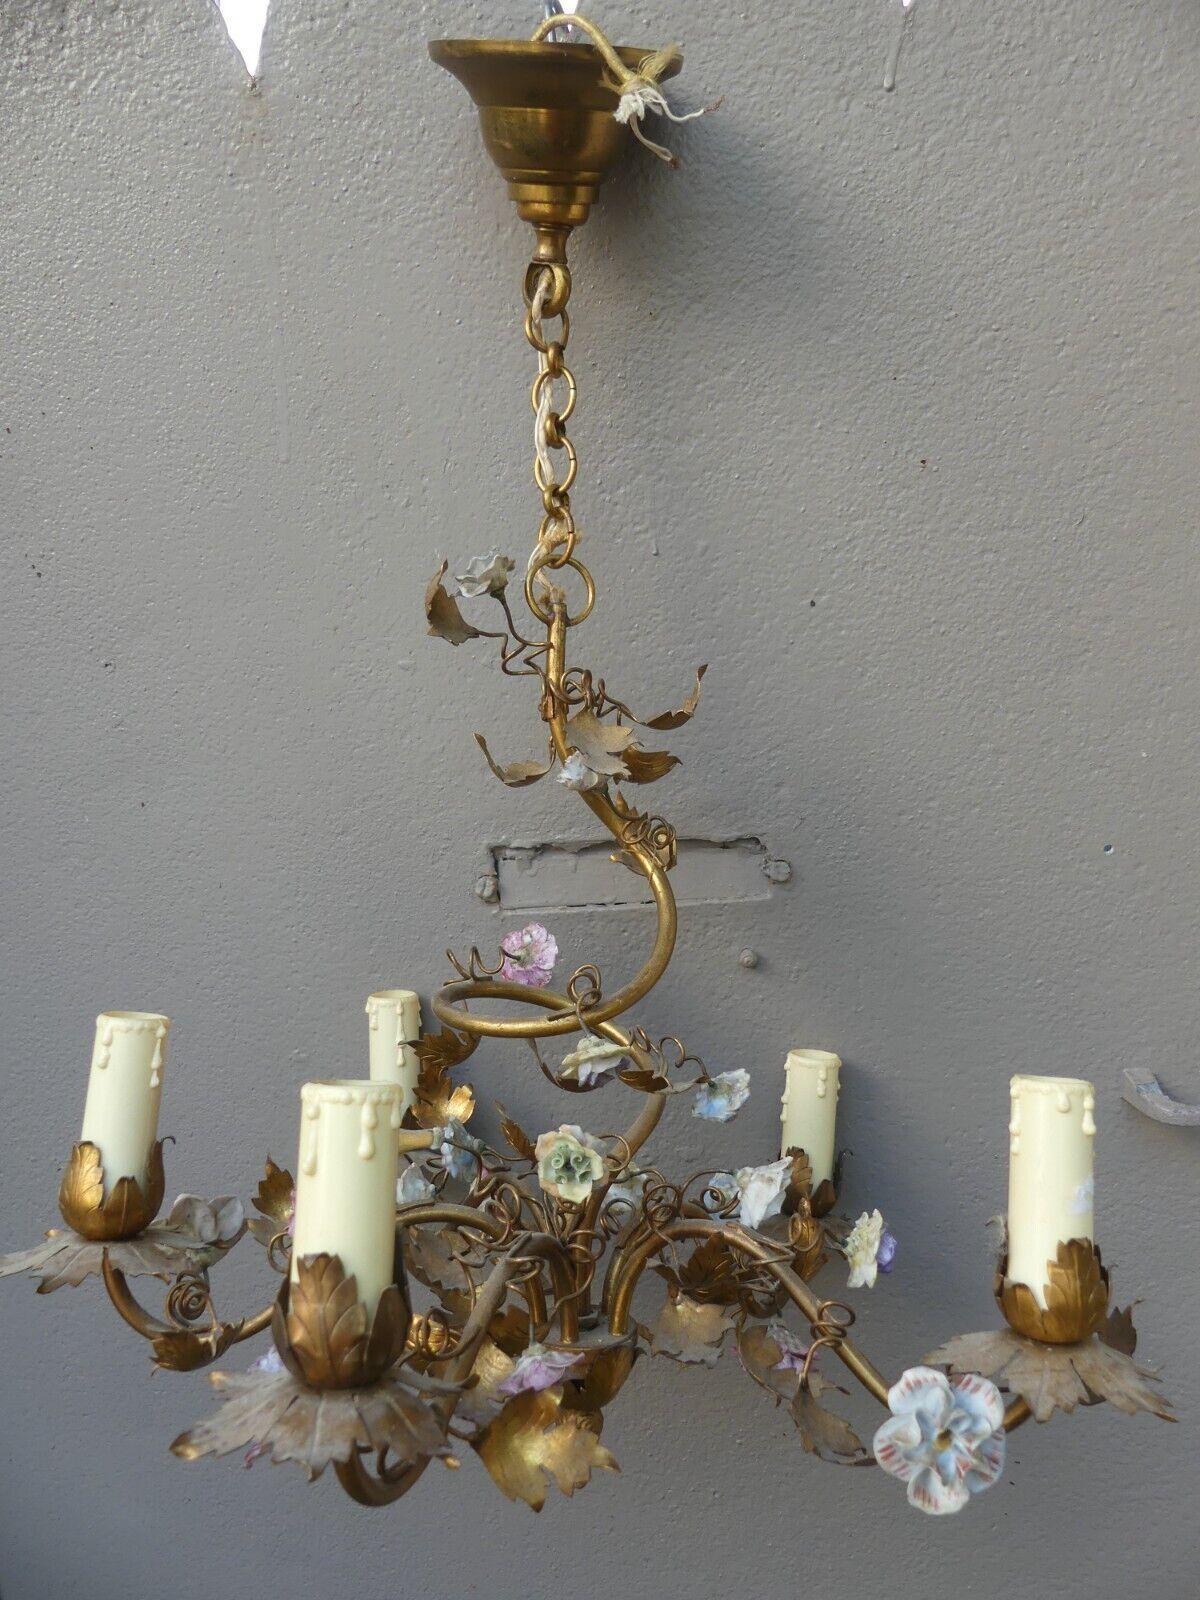 c1880 Antique French Louis XVI stlye Bronze & Porcelain Flowered Chandelier In Good Condition For Sale In Opa Locka, FL